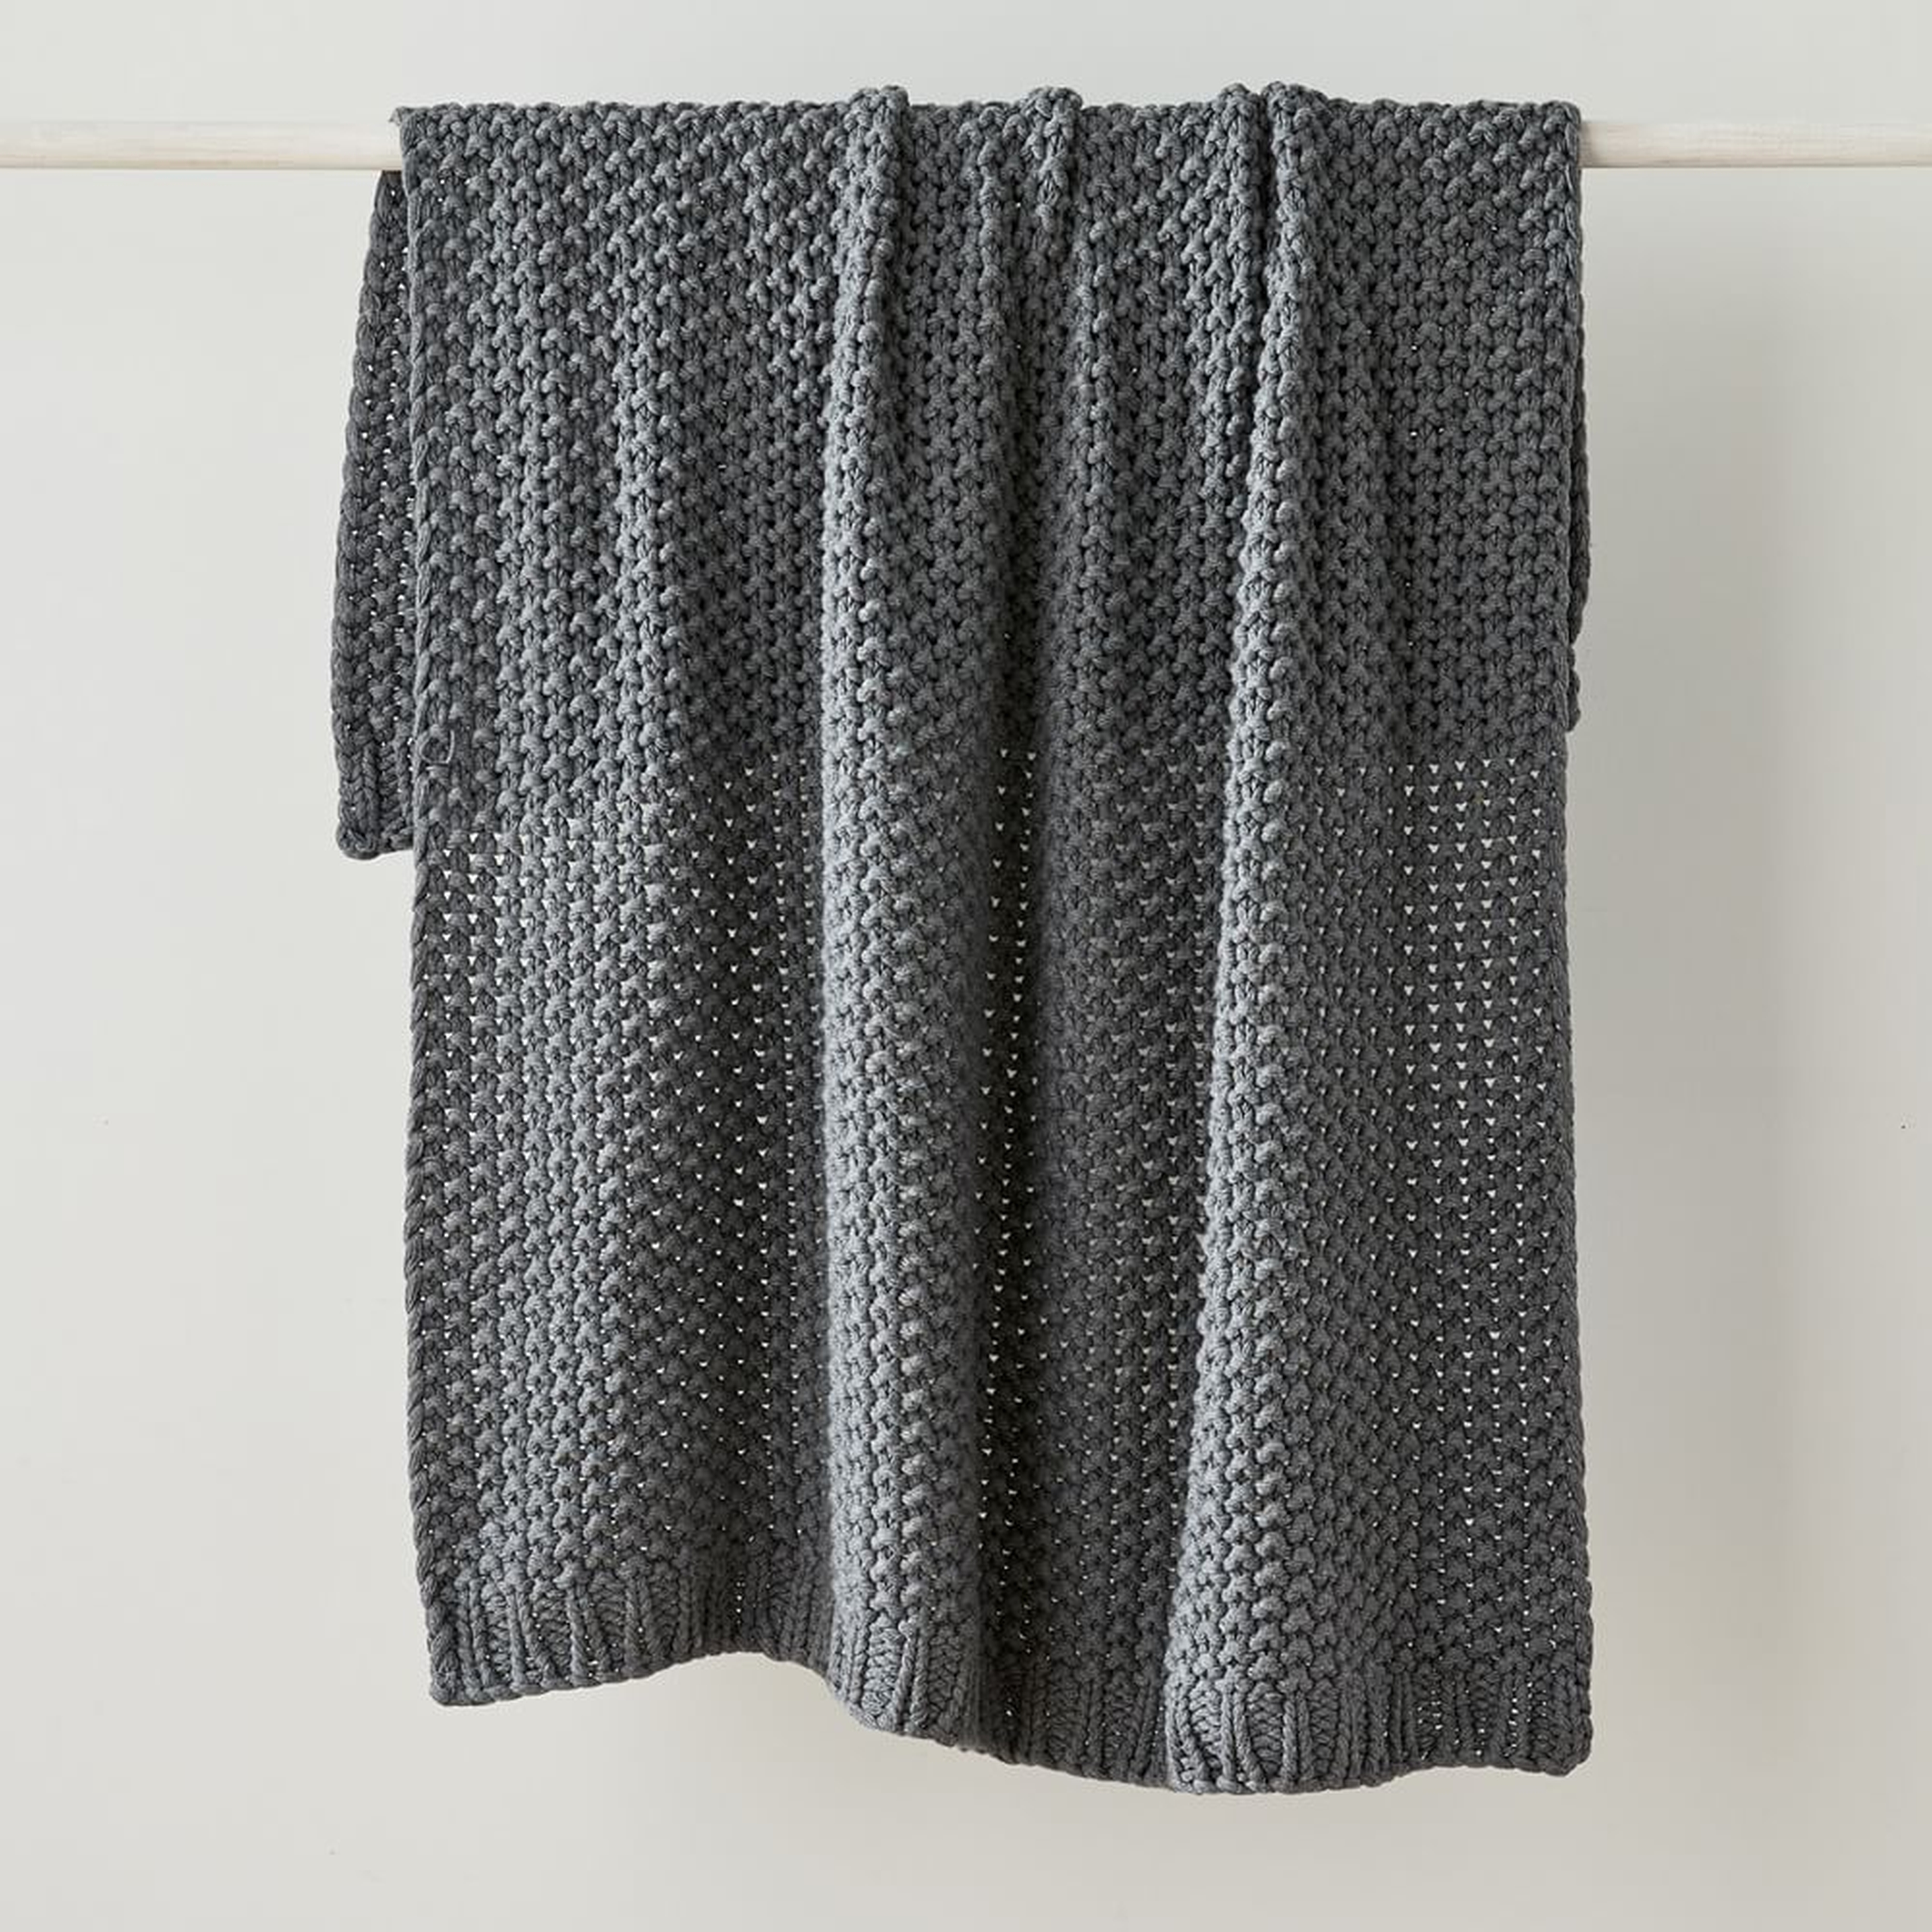 Chunky Cotton Knit Throw, 50"x60", Charcoal - West Elm